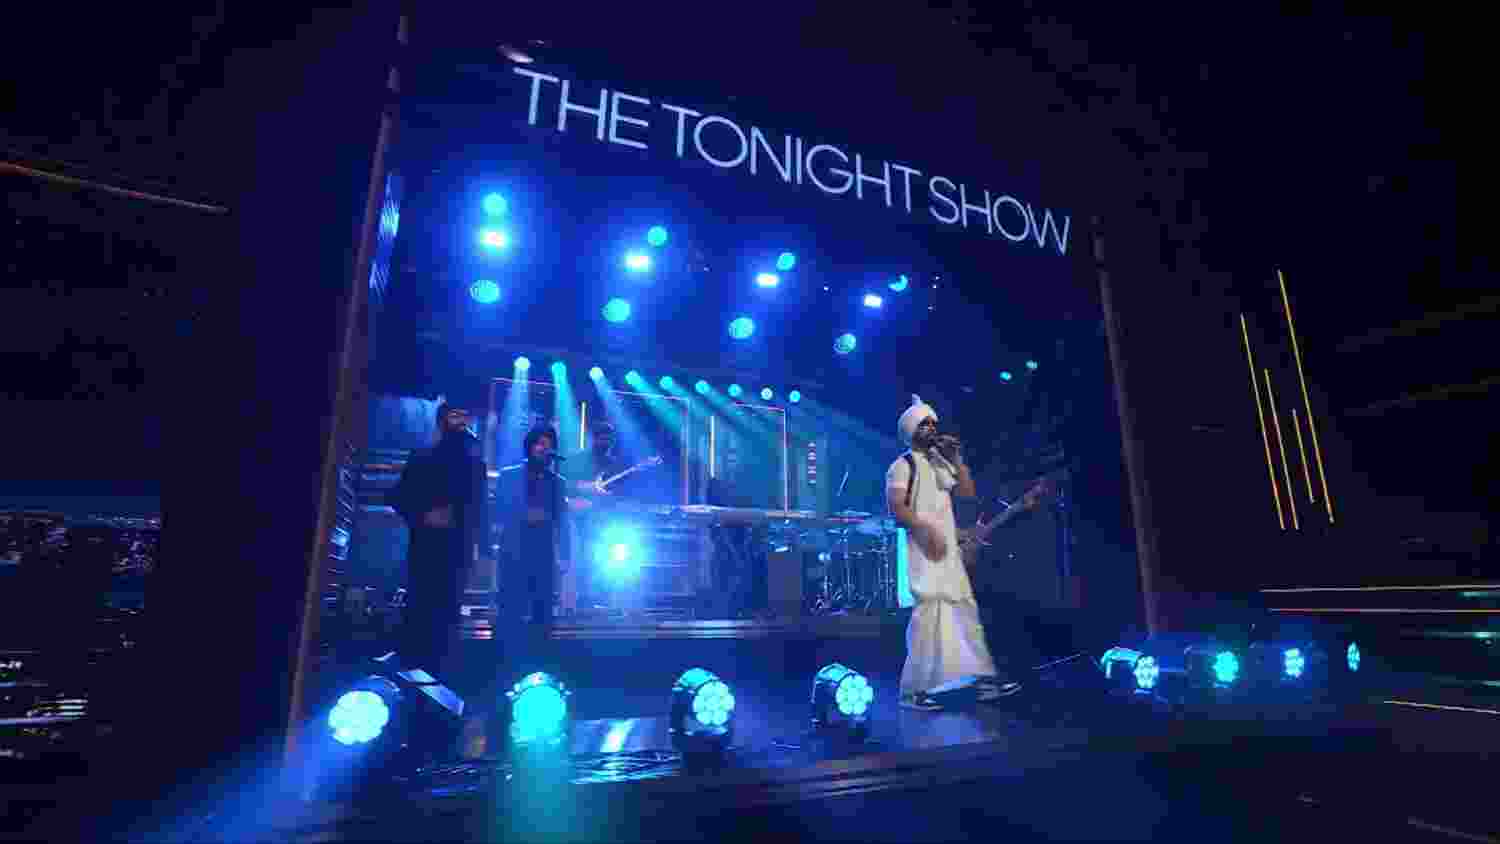 Diljit performs 'G.O.A.T.' on Jimmy Fallon's 'Tonight Show'